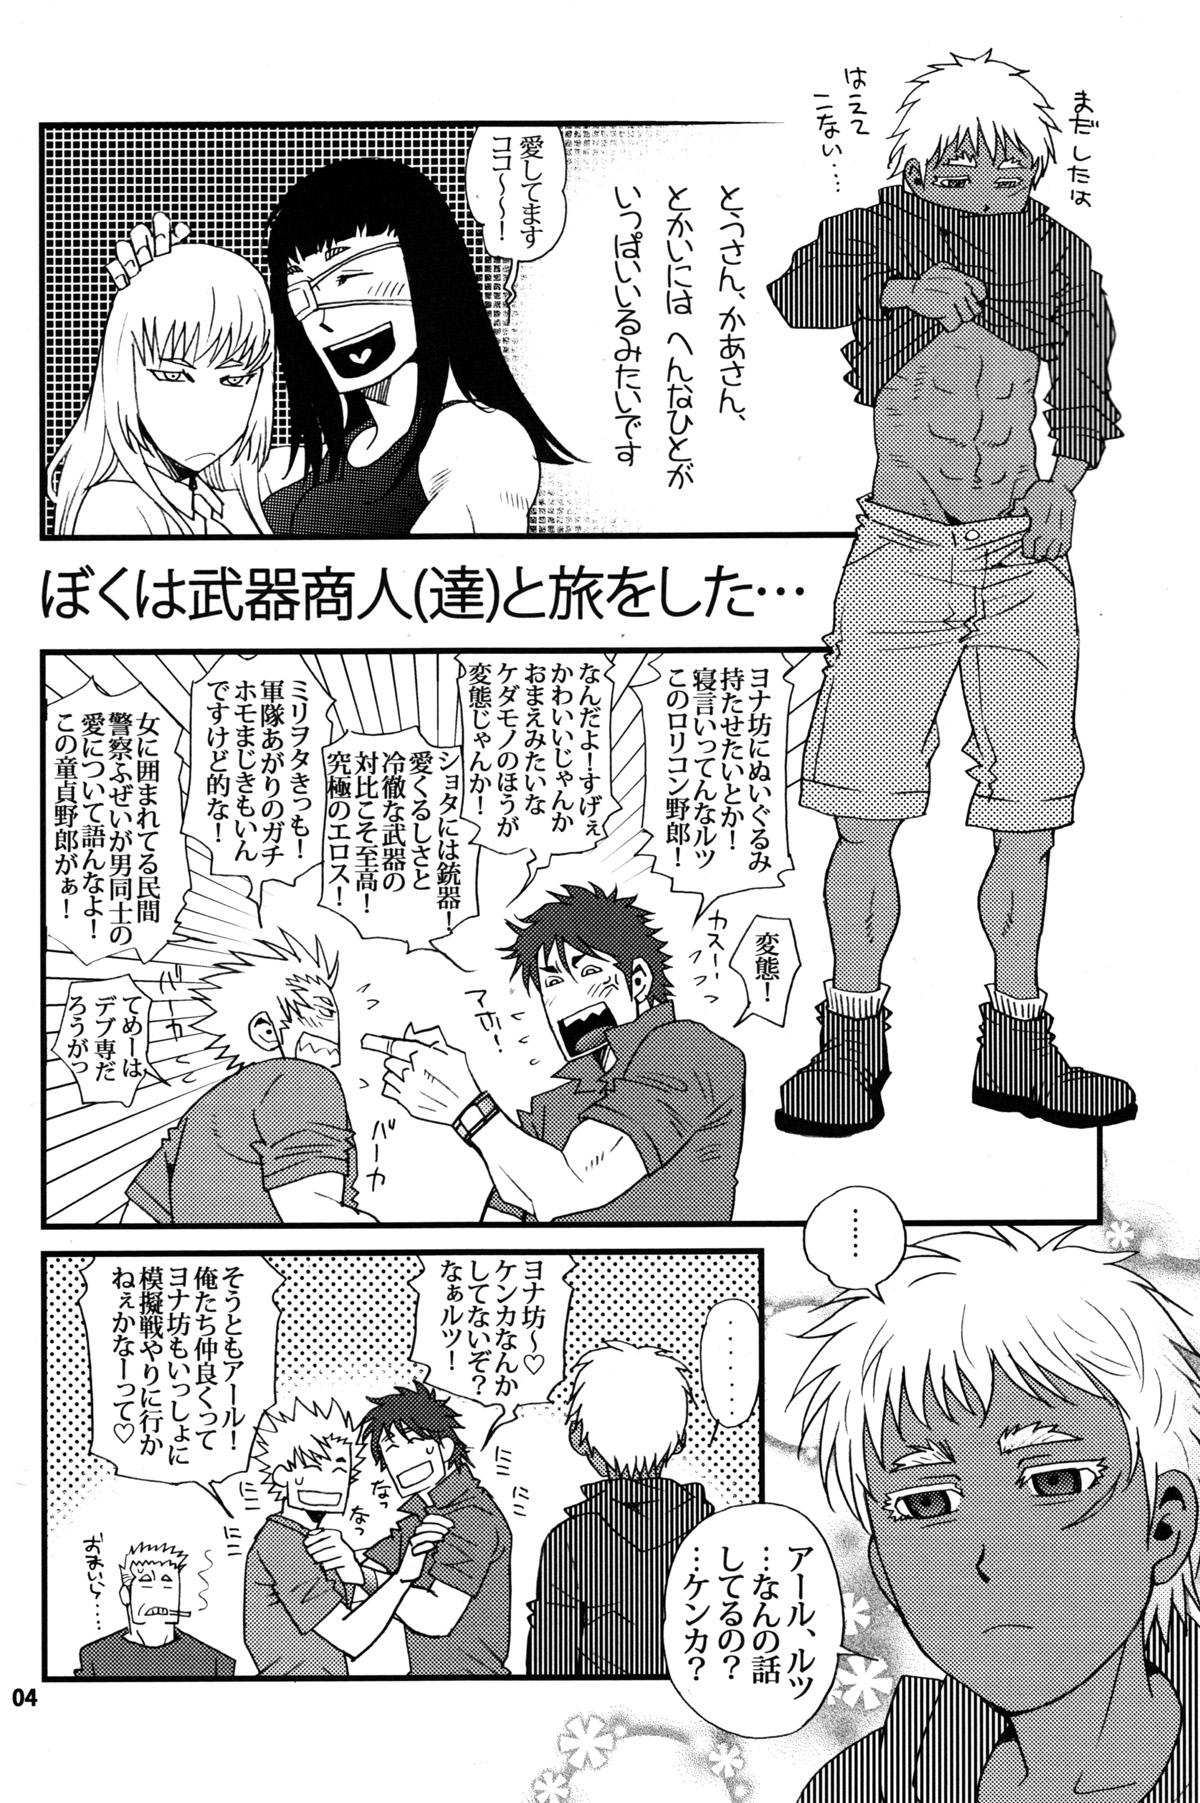 Athletic Eeny, meeny, miny, moe... - Jormungand Old Young - Page 2